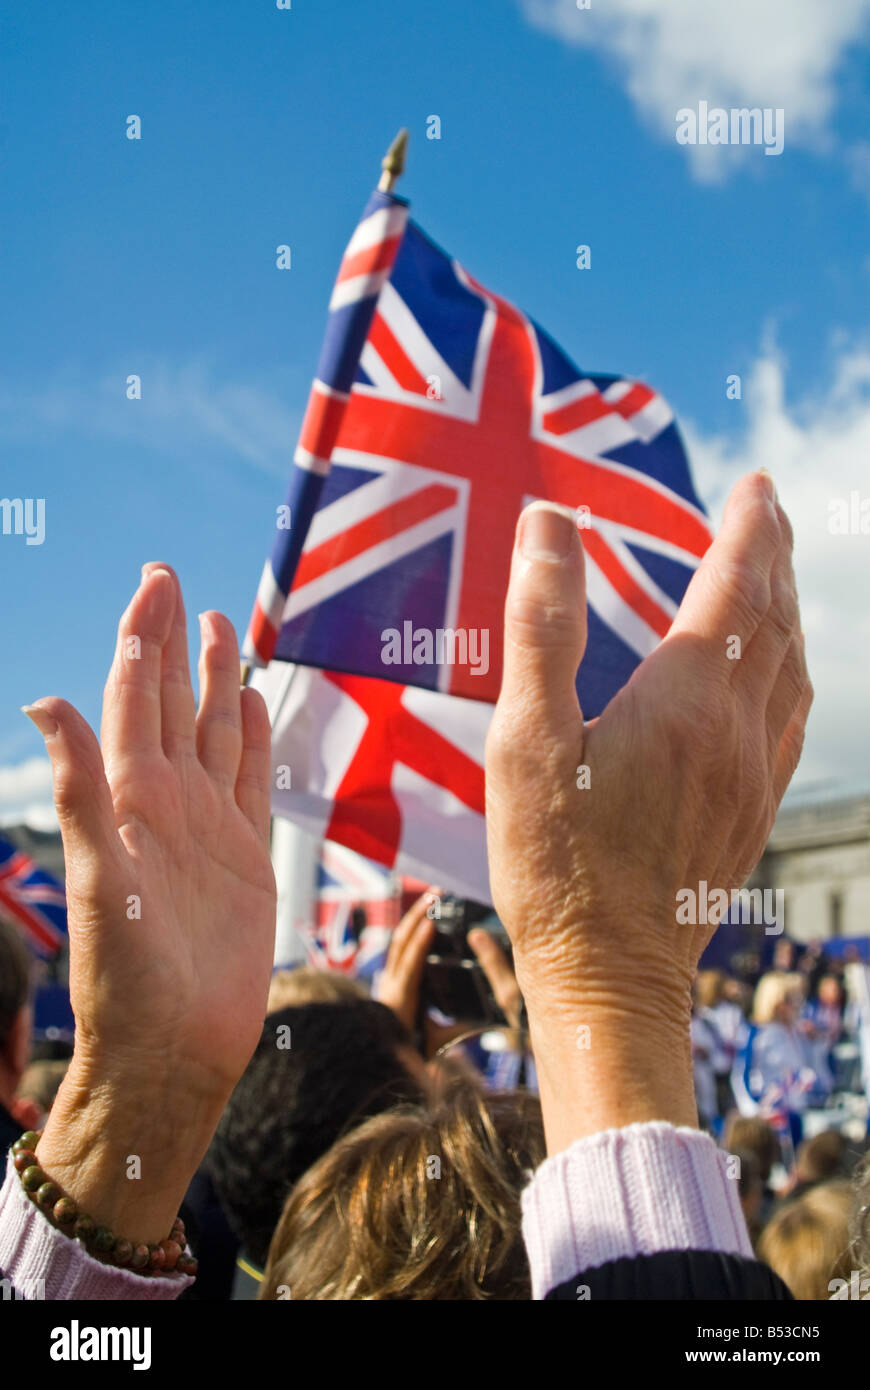 Vertical close up of crowds clapping and waving Union Jack and St George Cross flags at a celebration in London. Stock Photo